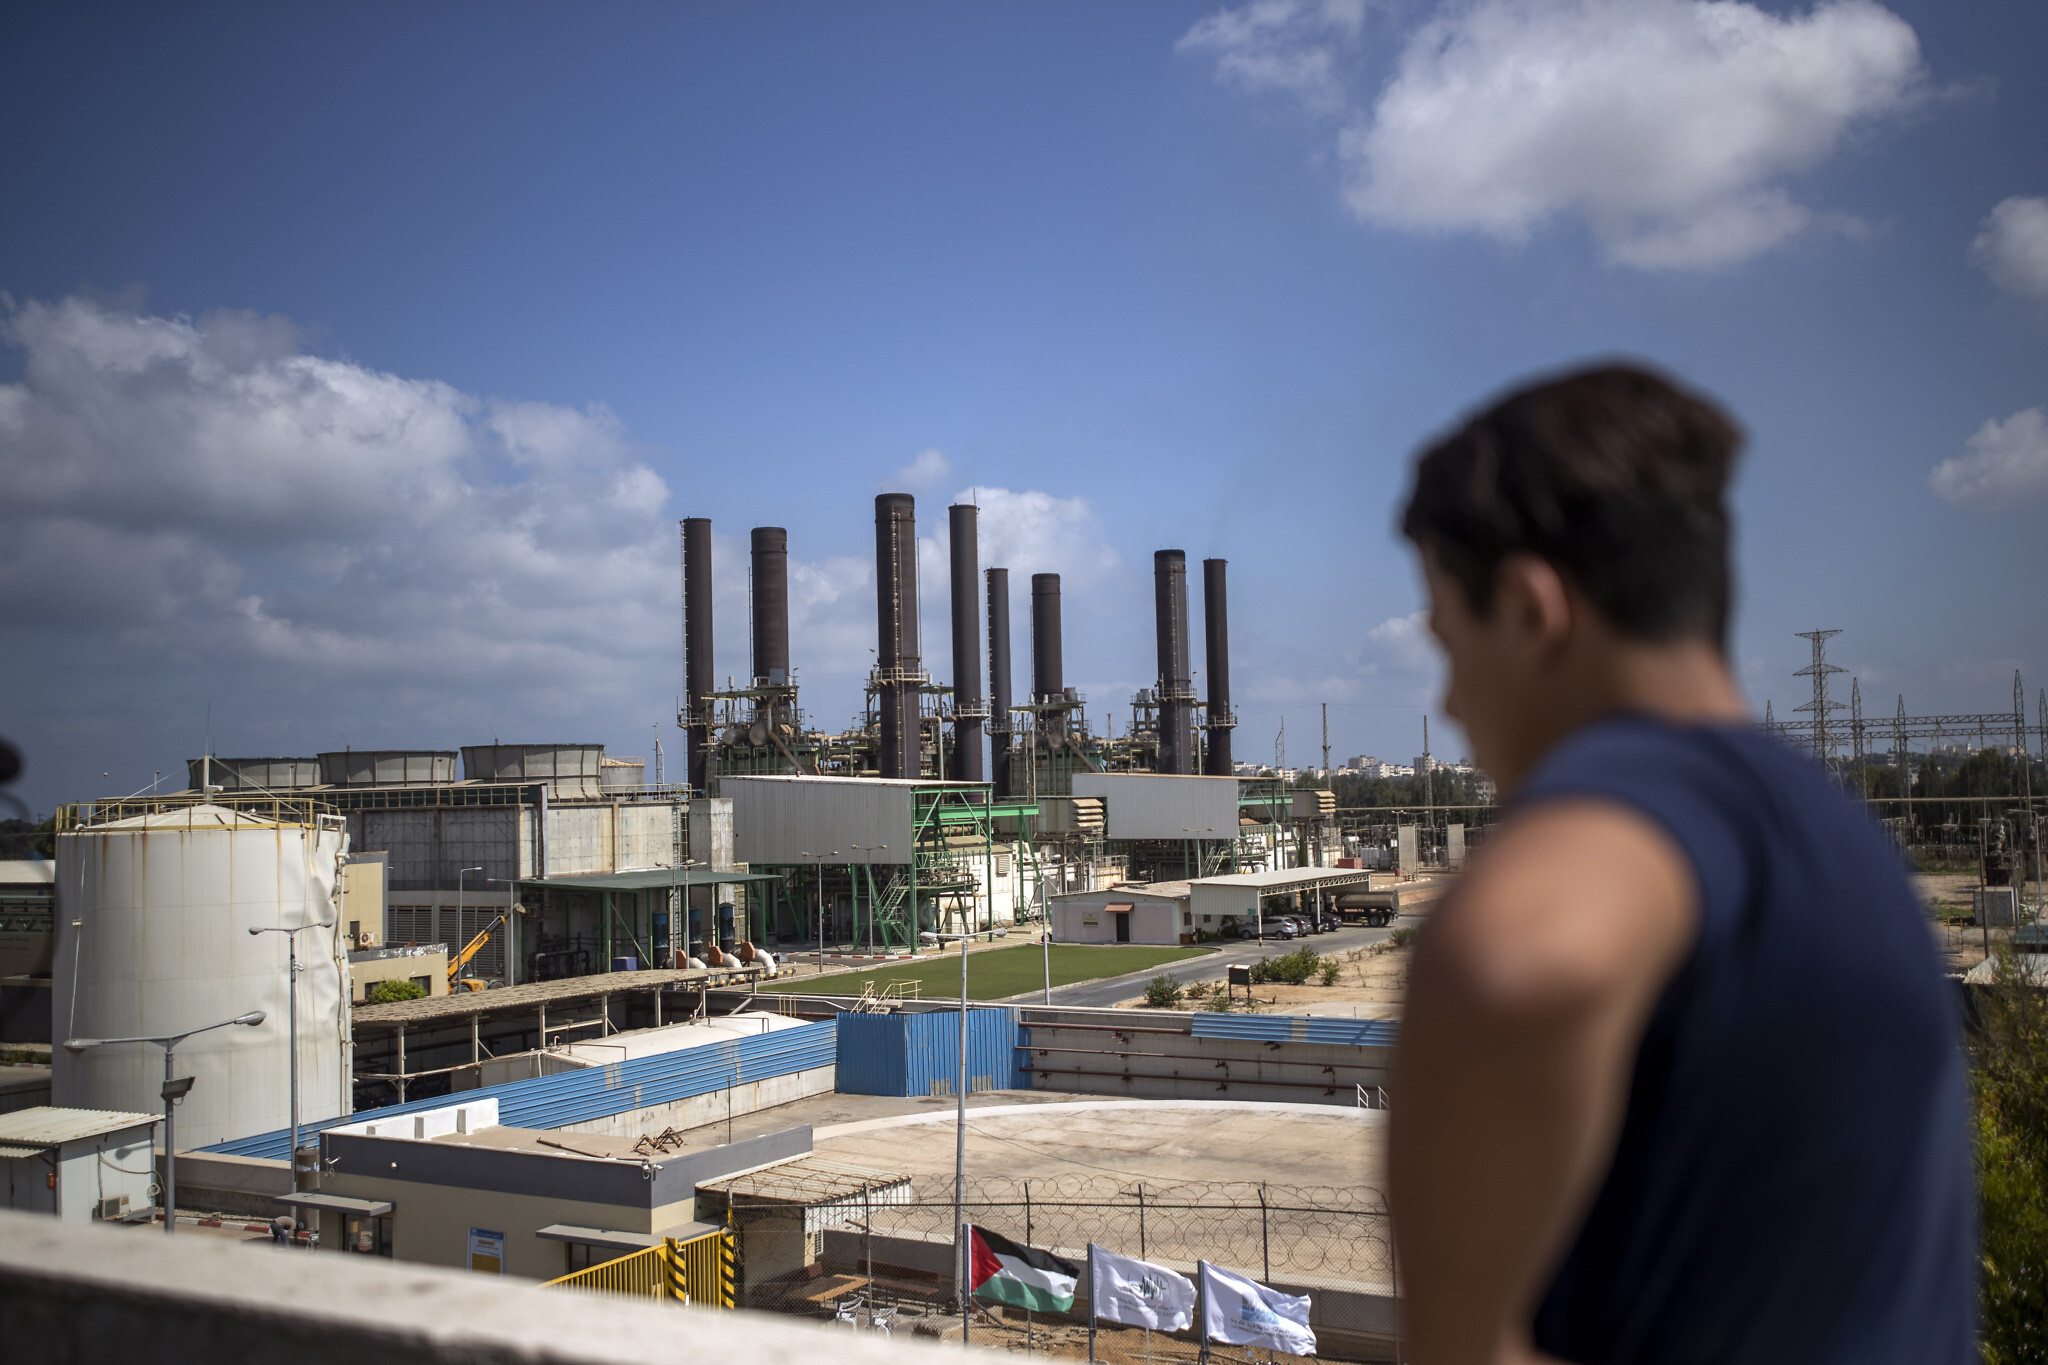 A Palestinian man, on the rooftop of his home, looks at Gaza’s power plant after it was shut down, in the town of Nusairat, central Gaza Strip, August 18, 2020. (AP Photo/ Khalil Hamra)